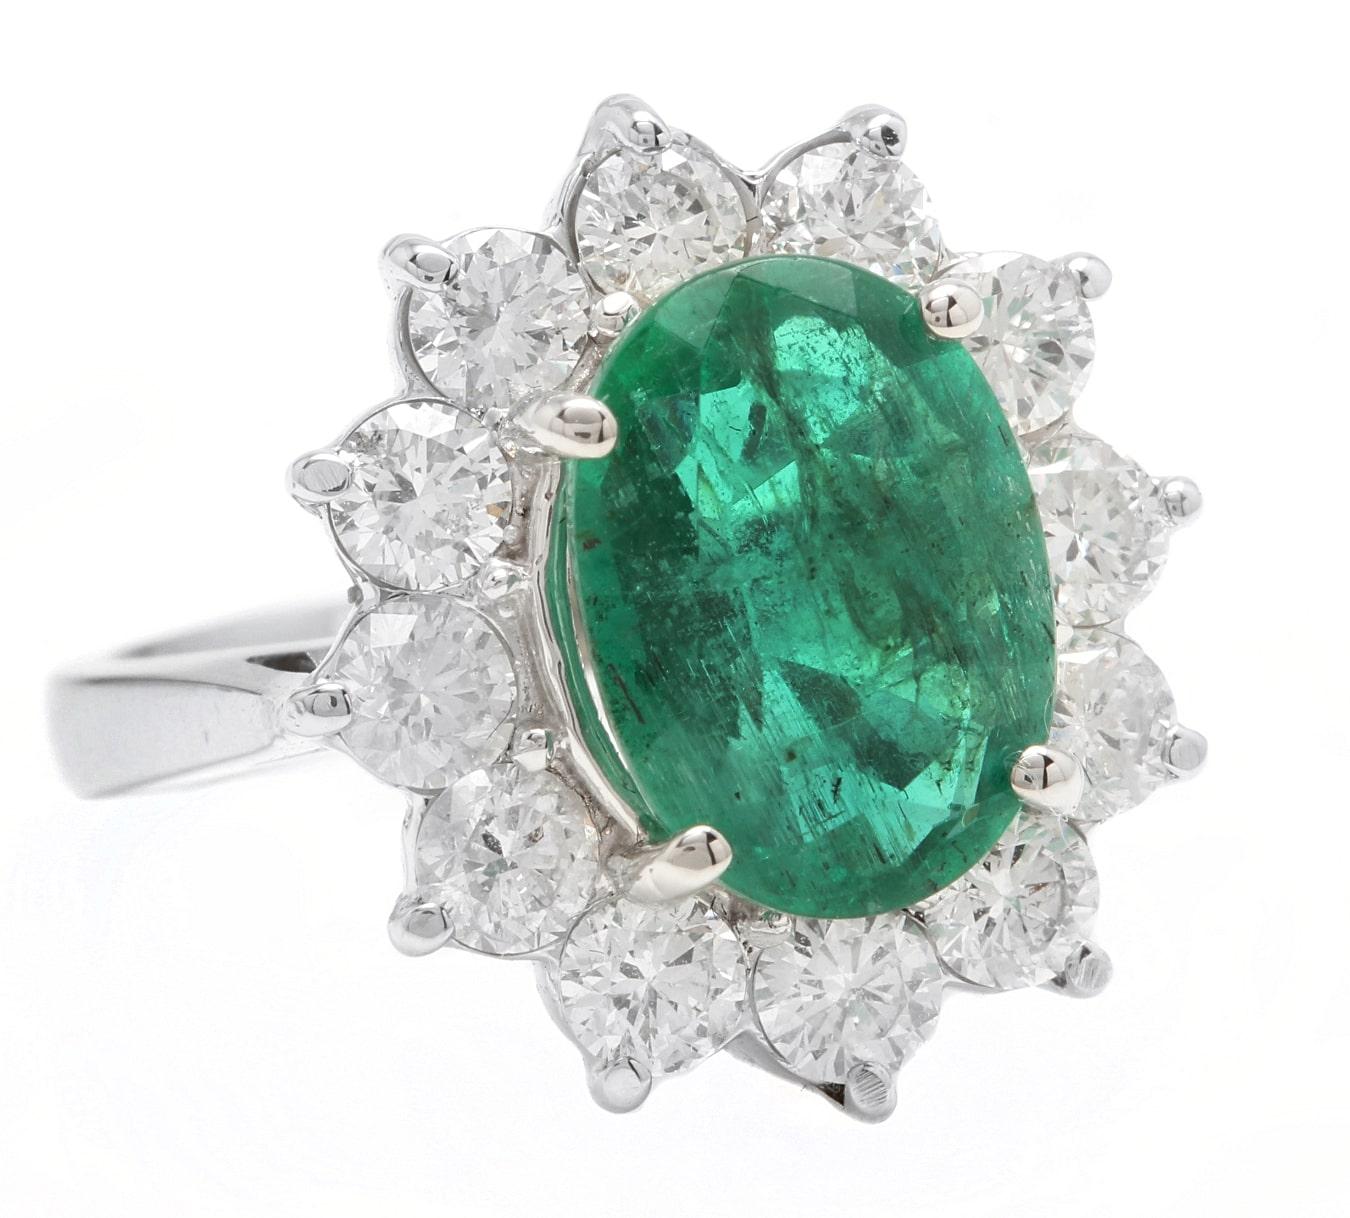 5.80 Carats Natural Emerald and Diamond 18K Solid White Gold Ring

Total Natural Green Emerald Weight is: Approx. 4.00 Carats (transparent)

Emerald Measures: 11 x 9mm

Natural Round Diamonds Weight: Approx. 1.80 Carats (color H / Clarity